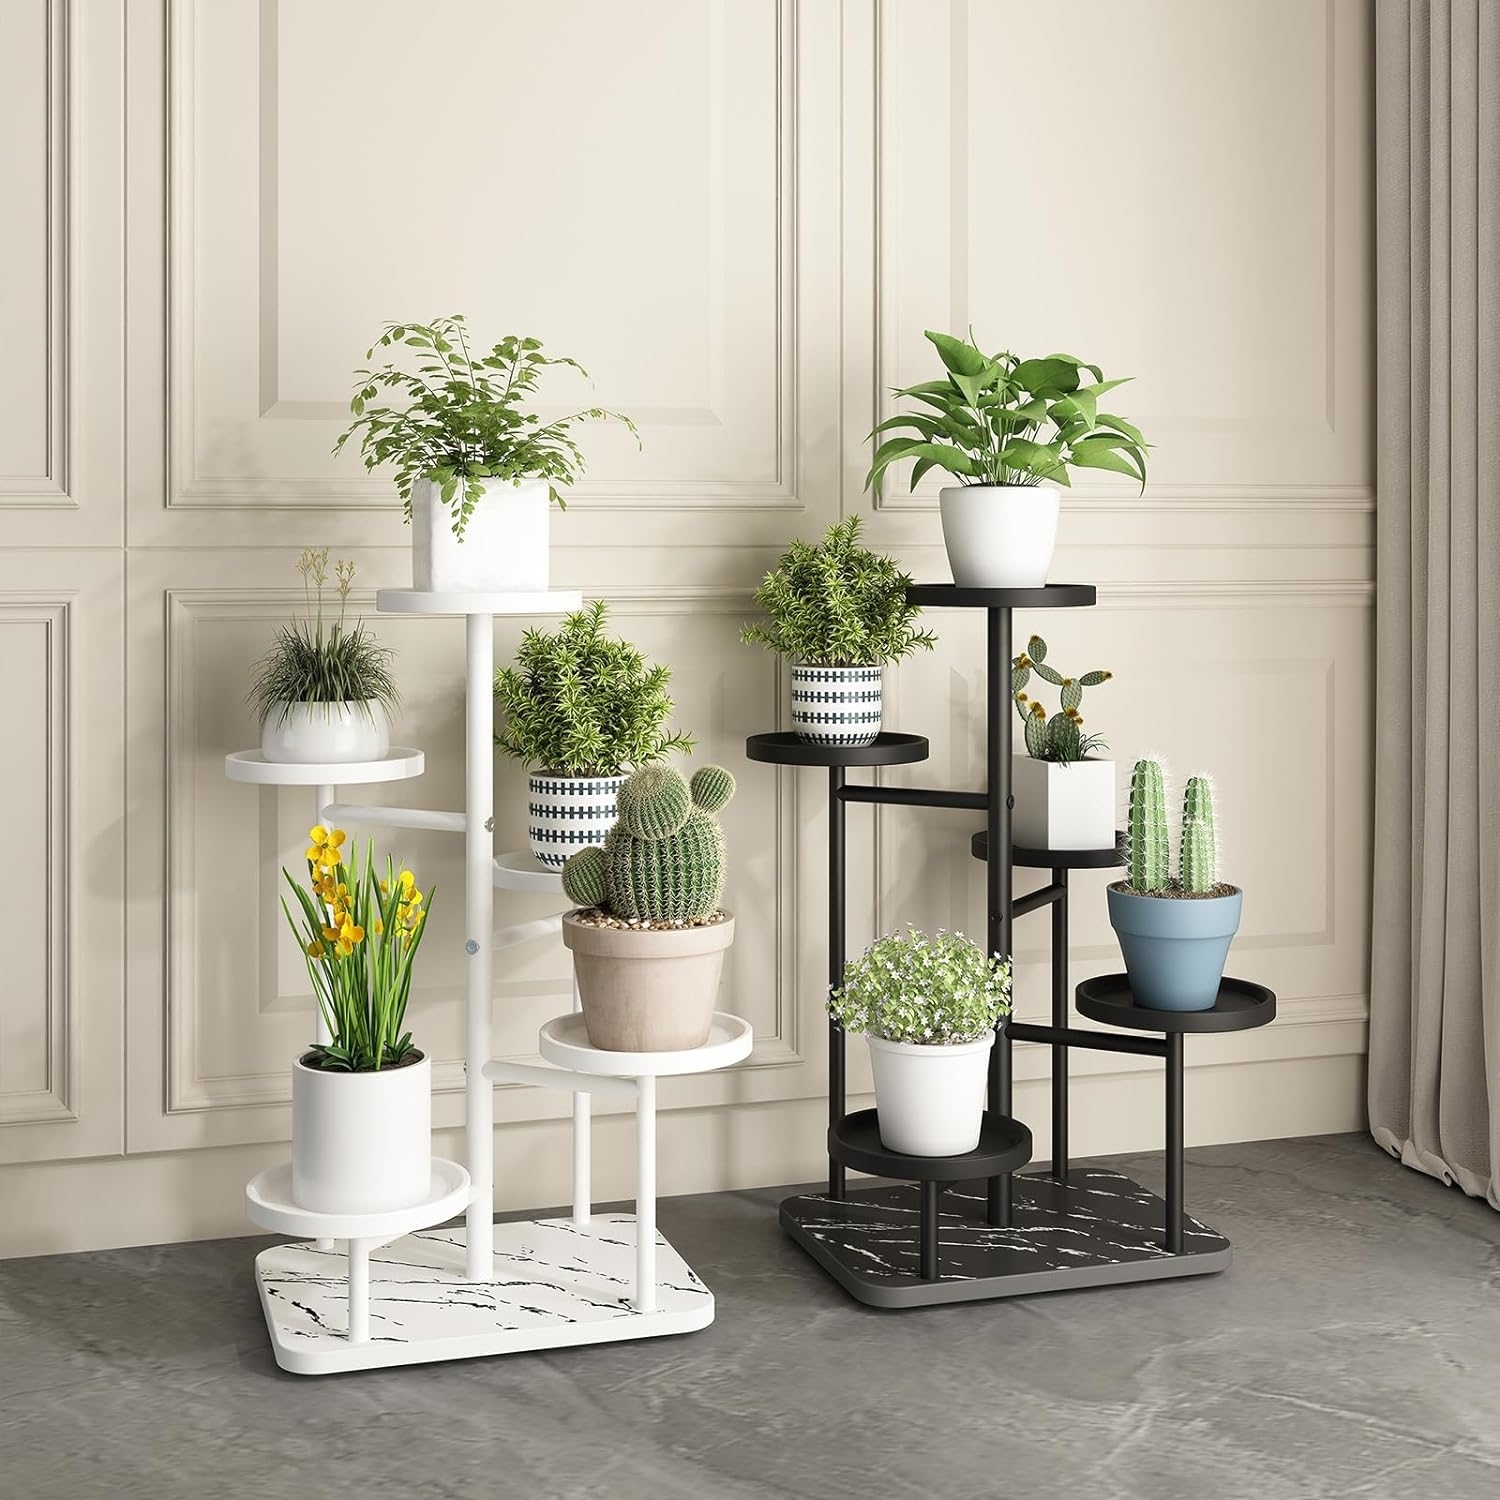 Multi-tiered indoor plant stand displaying various houseplants for home decor inspiration